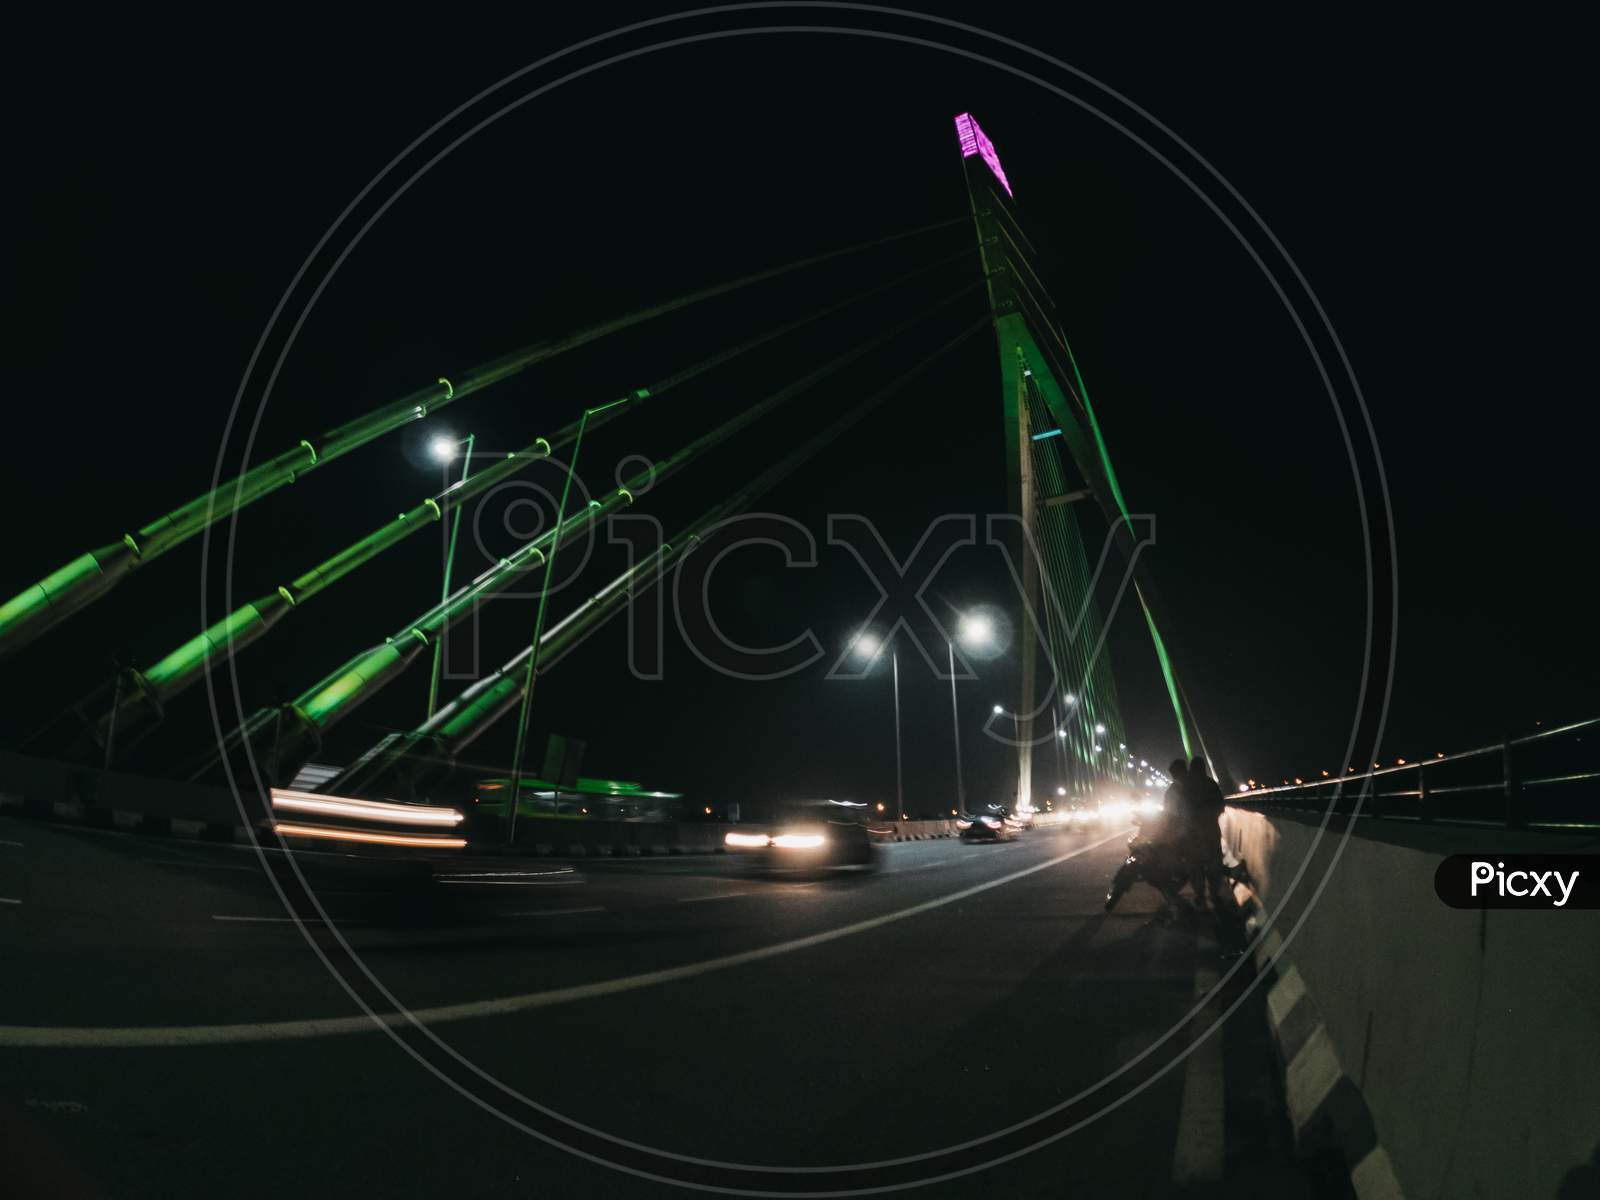 Signature Bridge Is A Cantilever Spar Cable-Stayed Bridge Which Spans The Yamuna River At Wazirabad Section, Connecting Wazirabad To East Delhi.